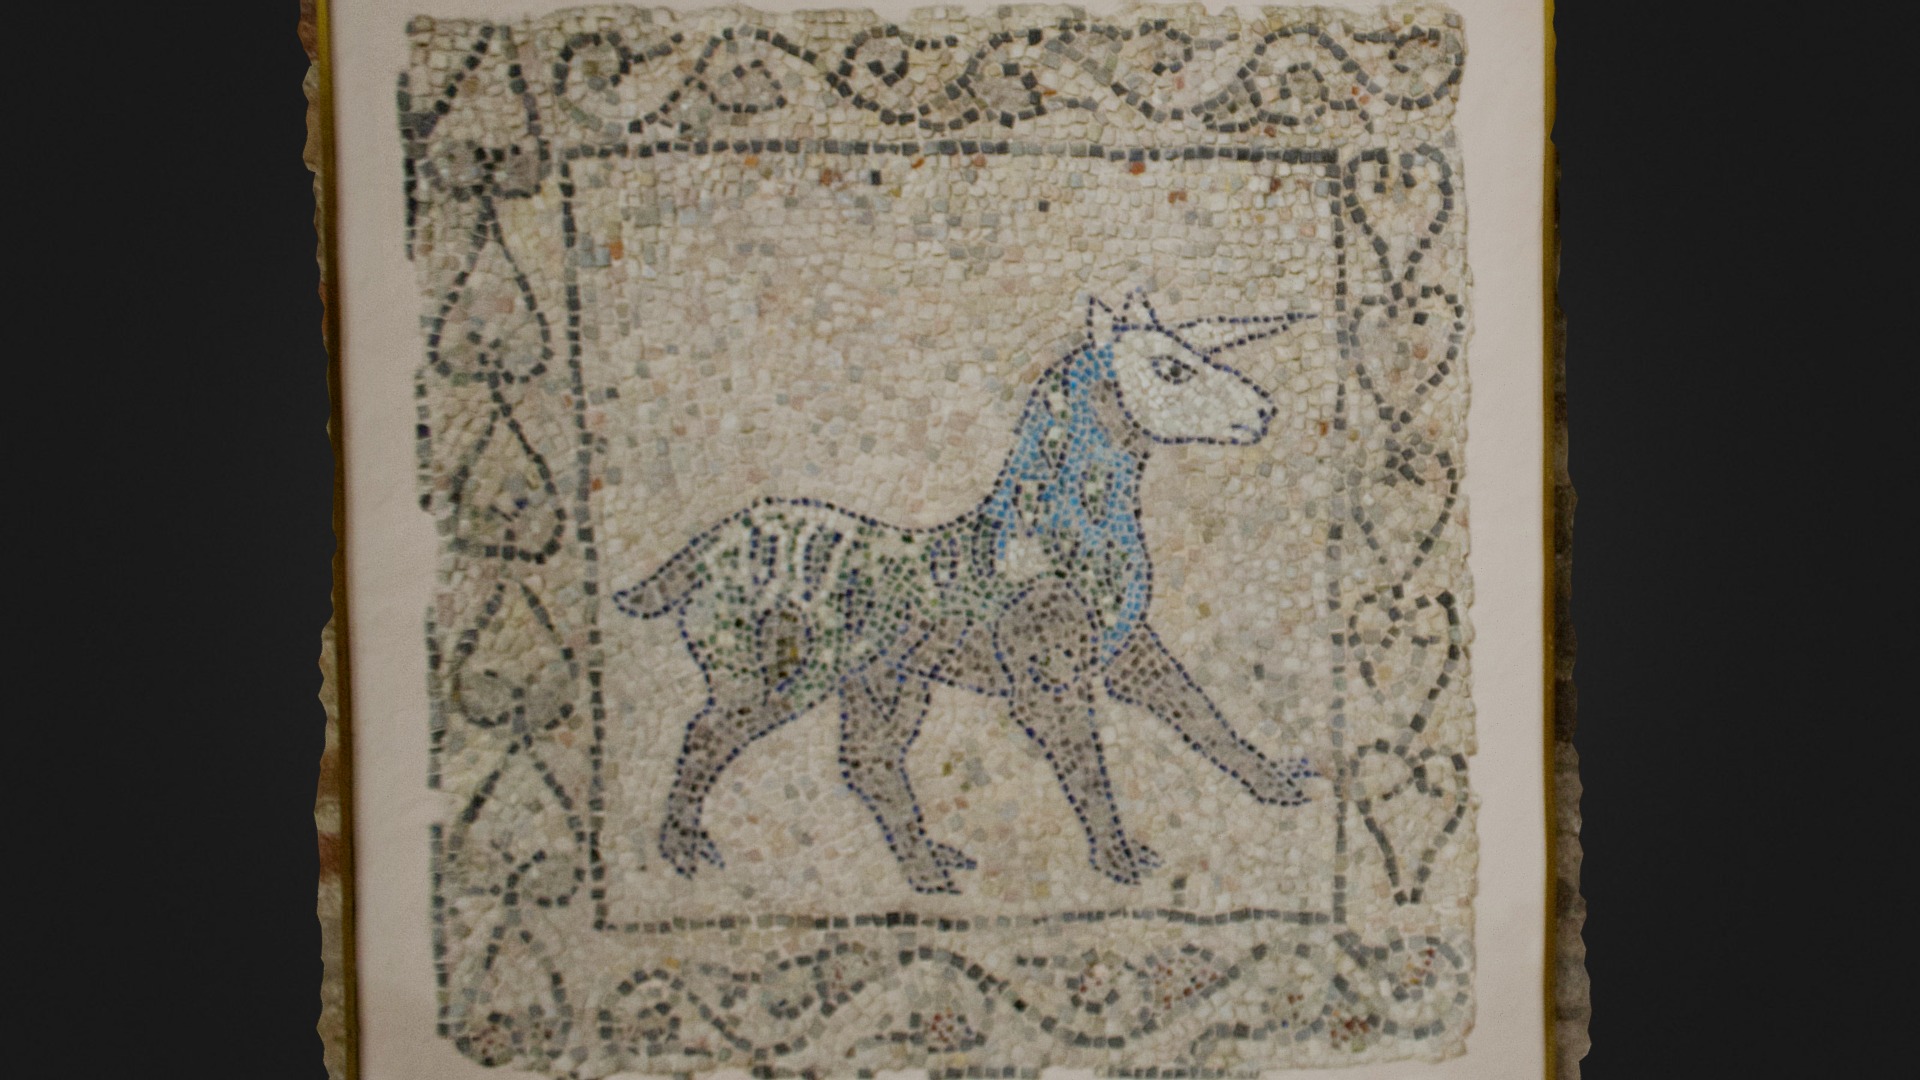 3D model S. Giovanni Evangelista Mosaico Unicorno - This is a 3D model of the S. Giovanni Evangelista Mosaico Unicorno. The 3D model is about a drawing of a horse.